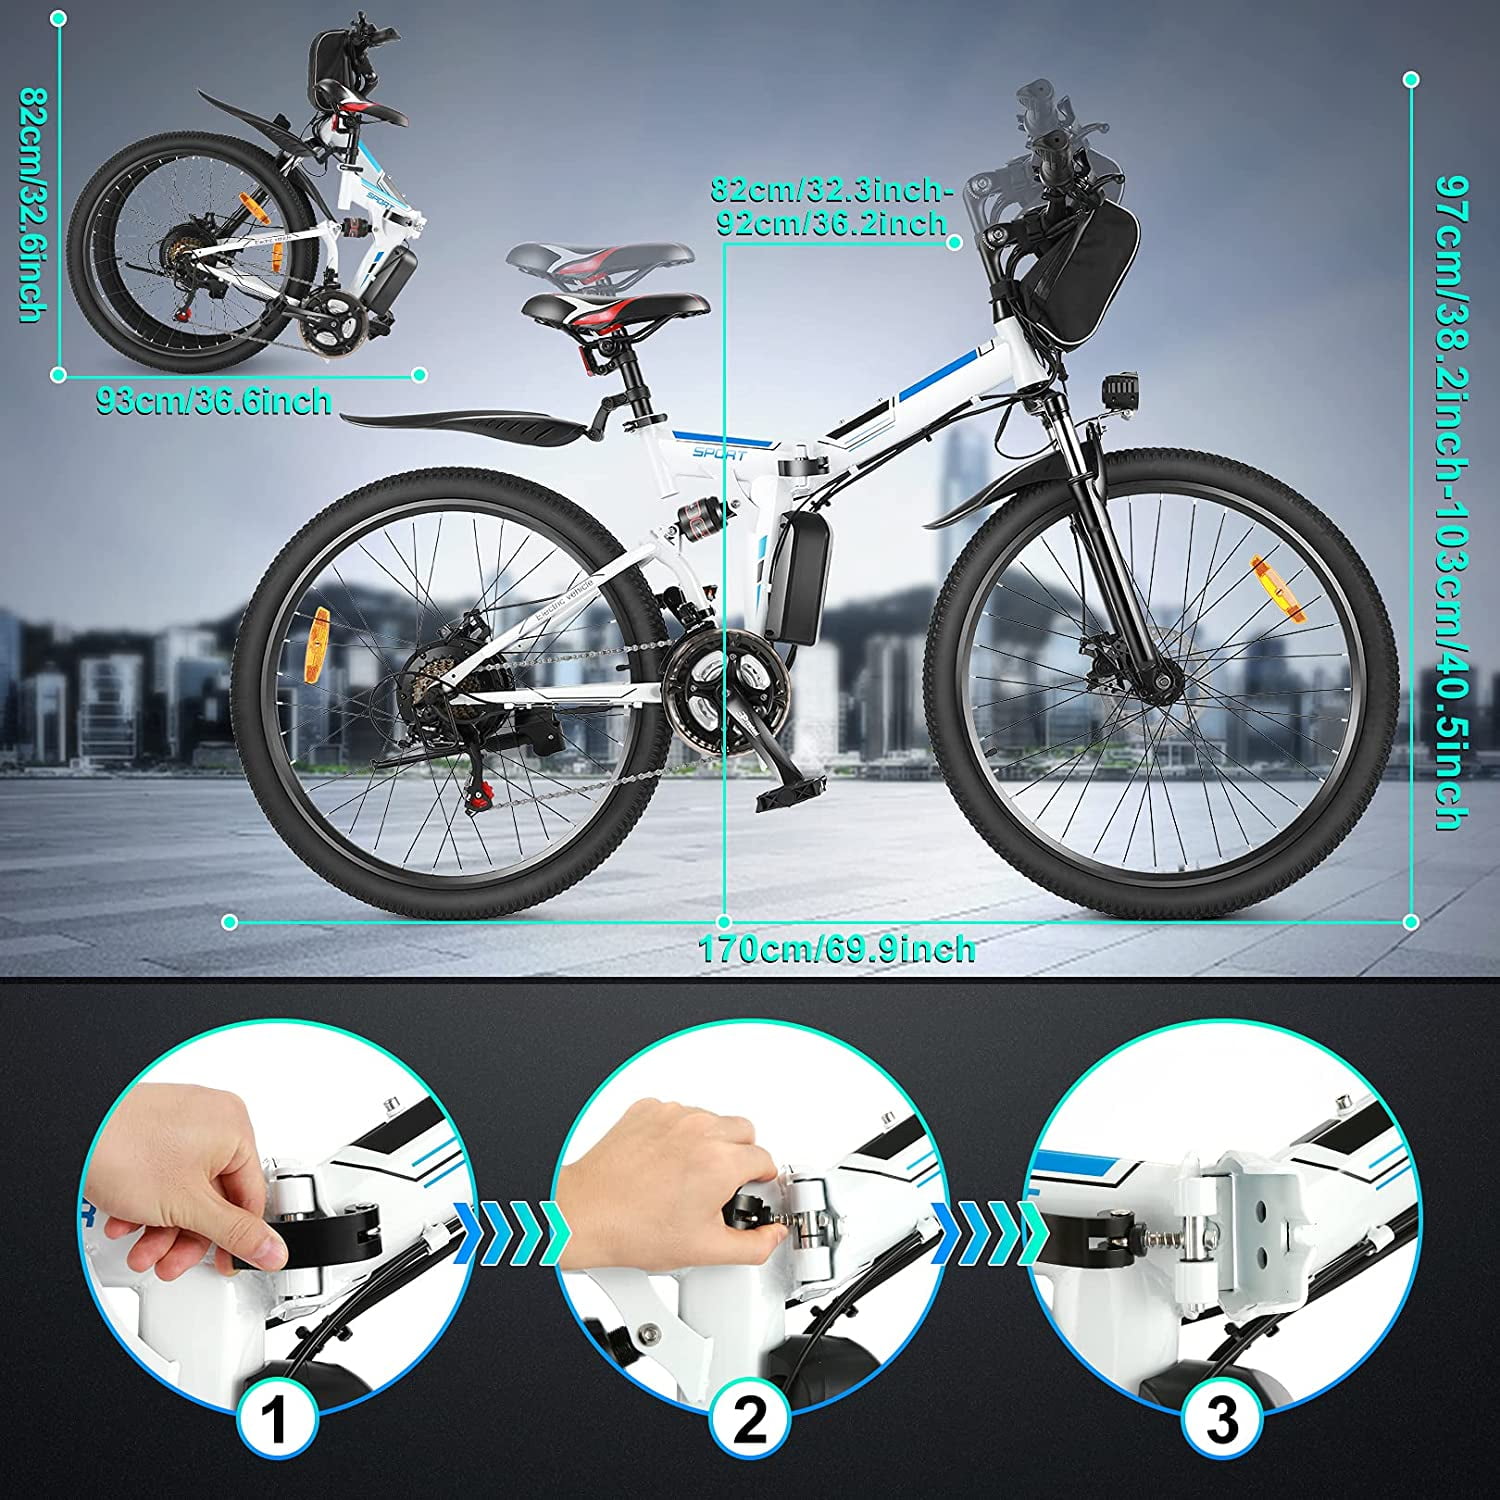 Ancheer 26" 250W 36V Folding Electric Mountain Bicycle EBike W/ Lithium Battery 